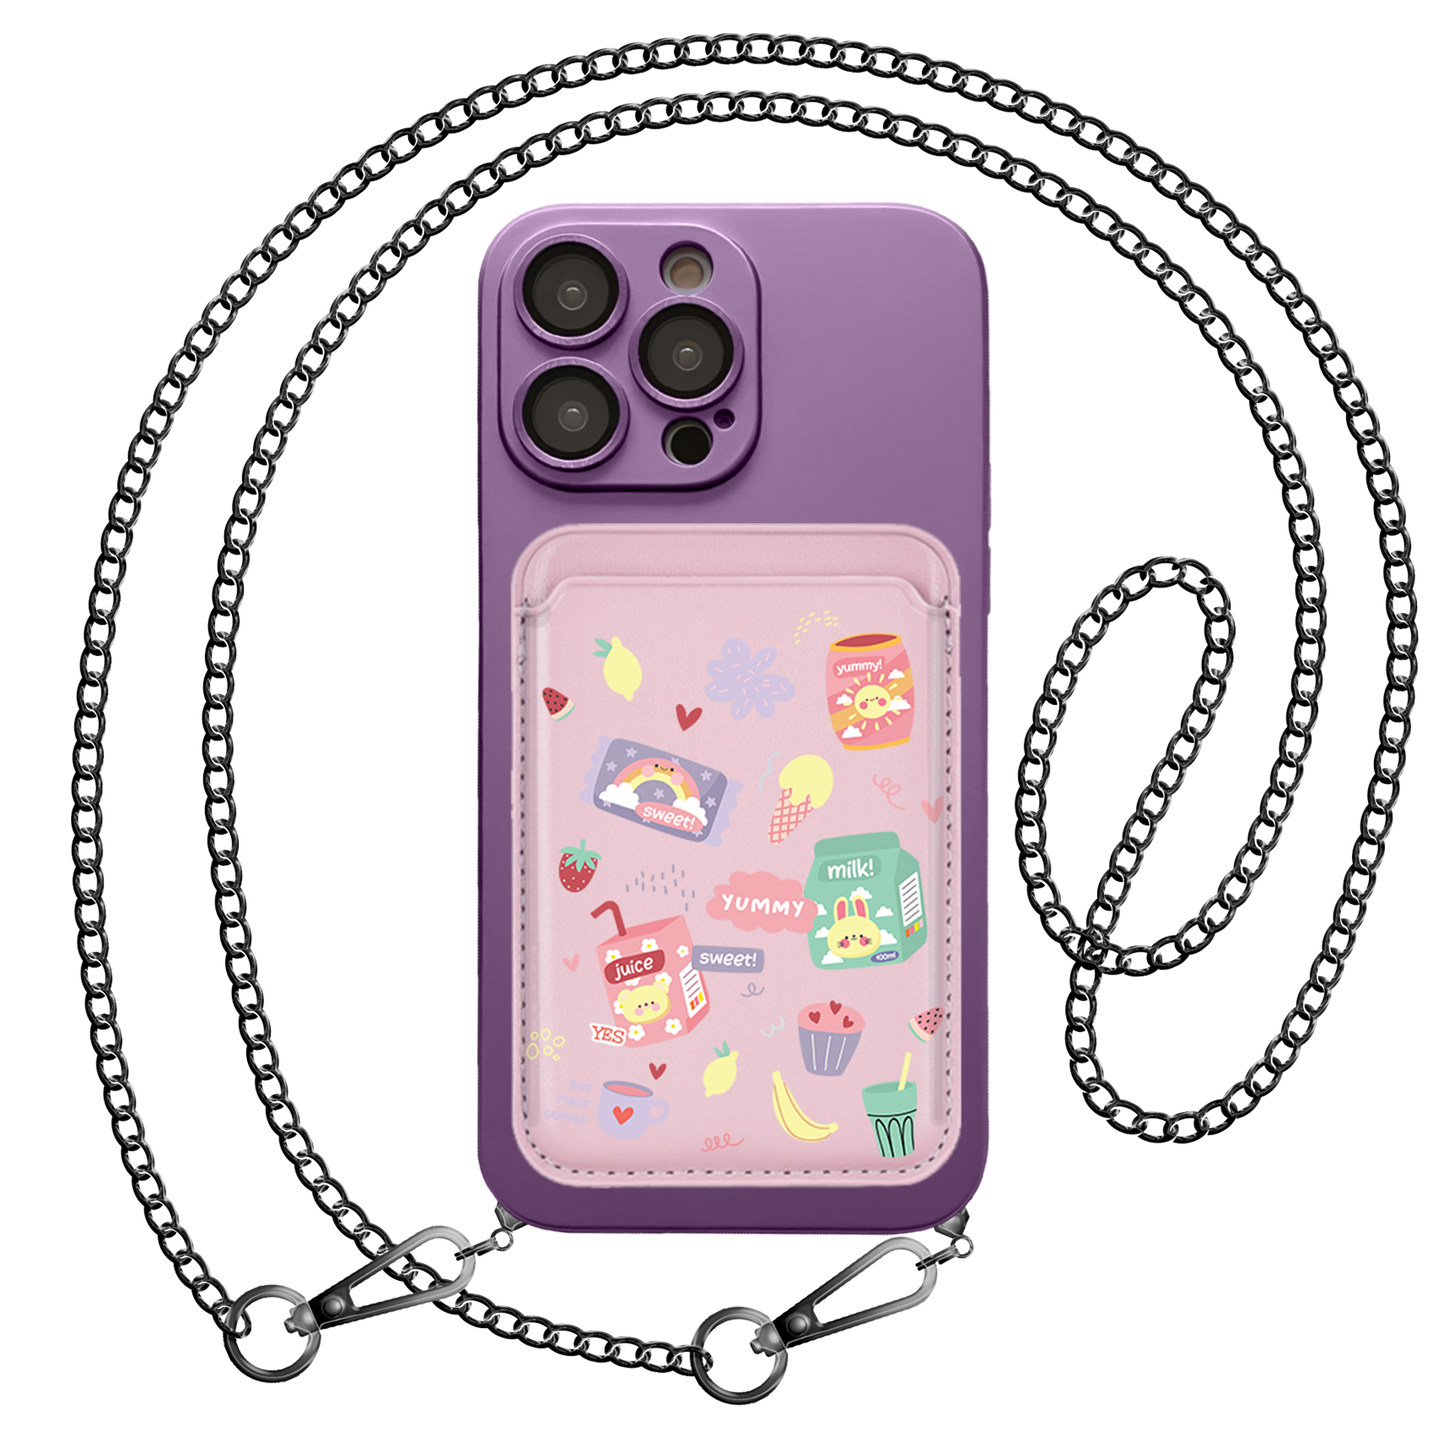 iPhone Magnetic Wallet Silicone Case - Sweet Yummy